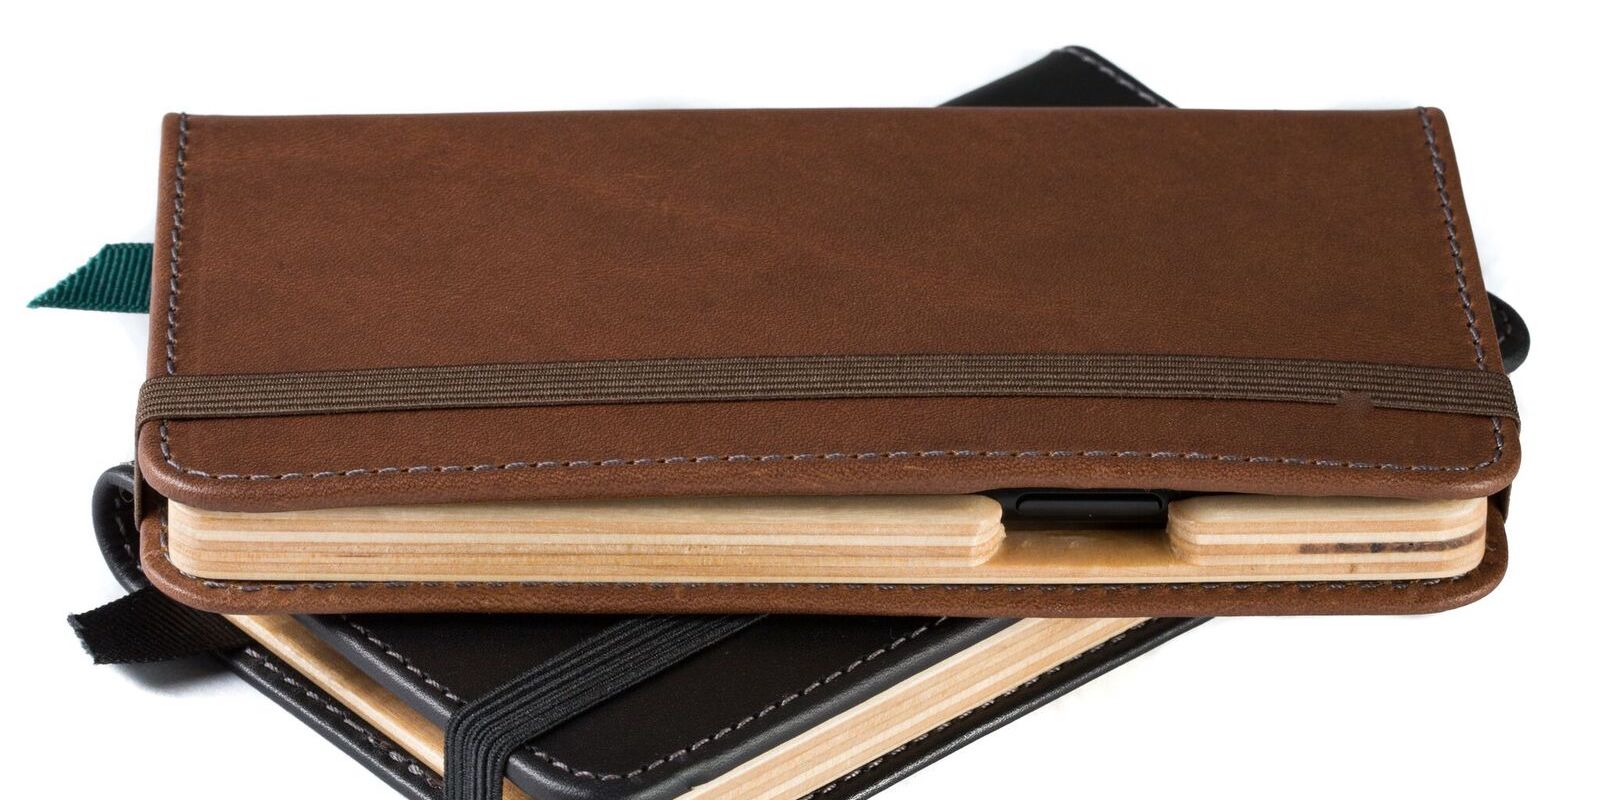 Pad & Quill launches new aged leather iPhone 8/Plus & X wallet cases + more - 9to5Toys